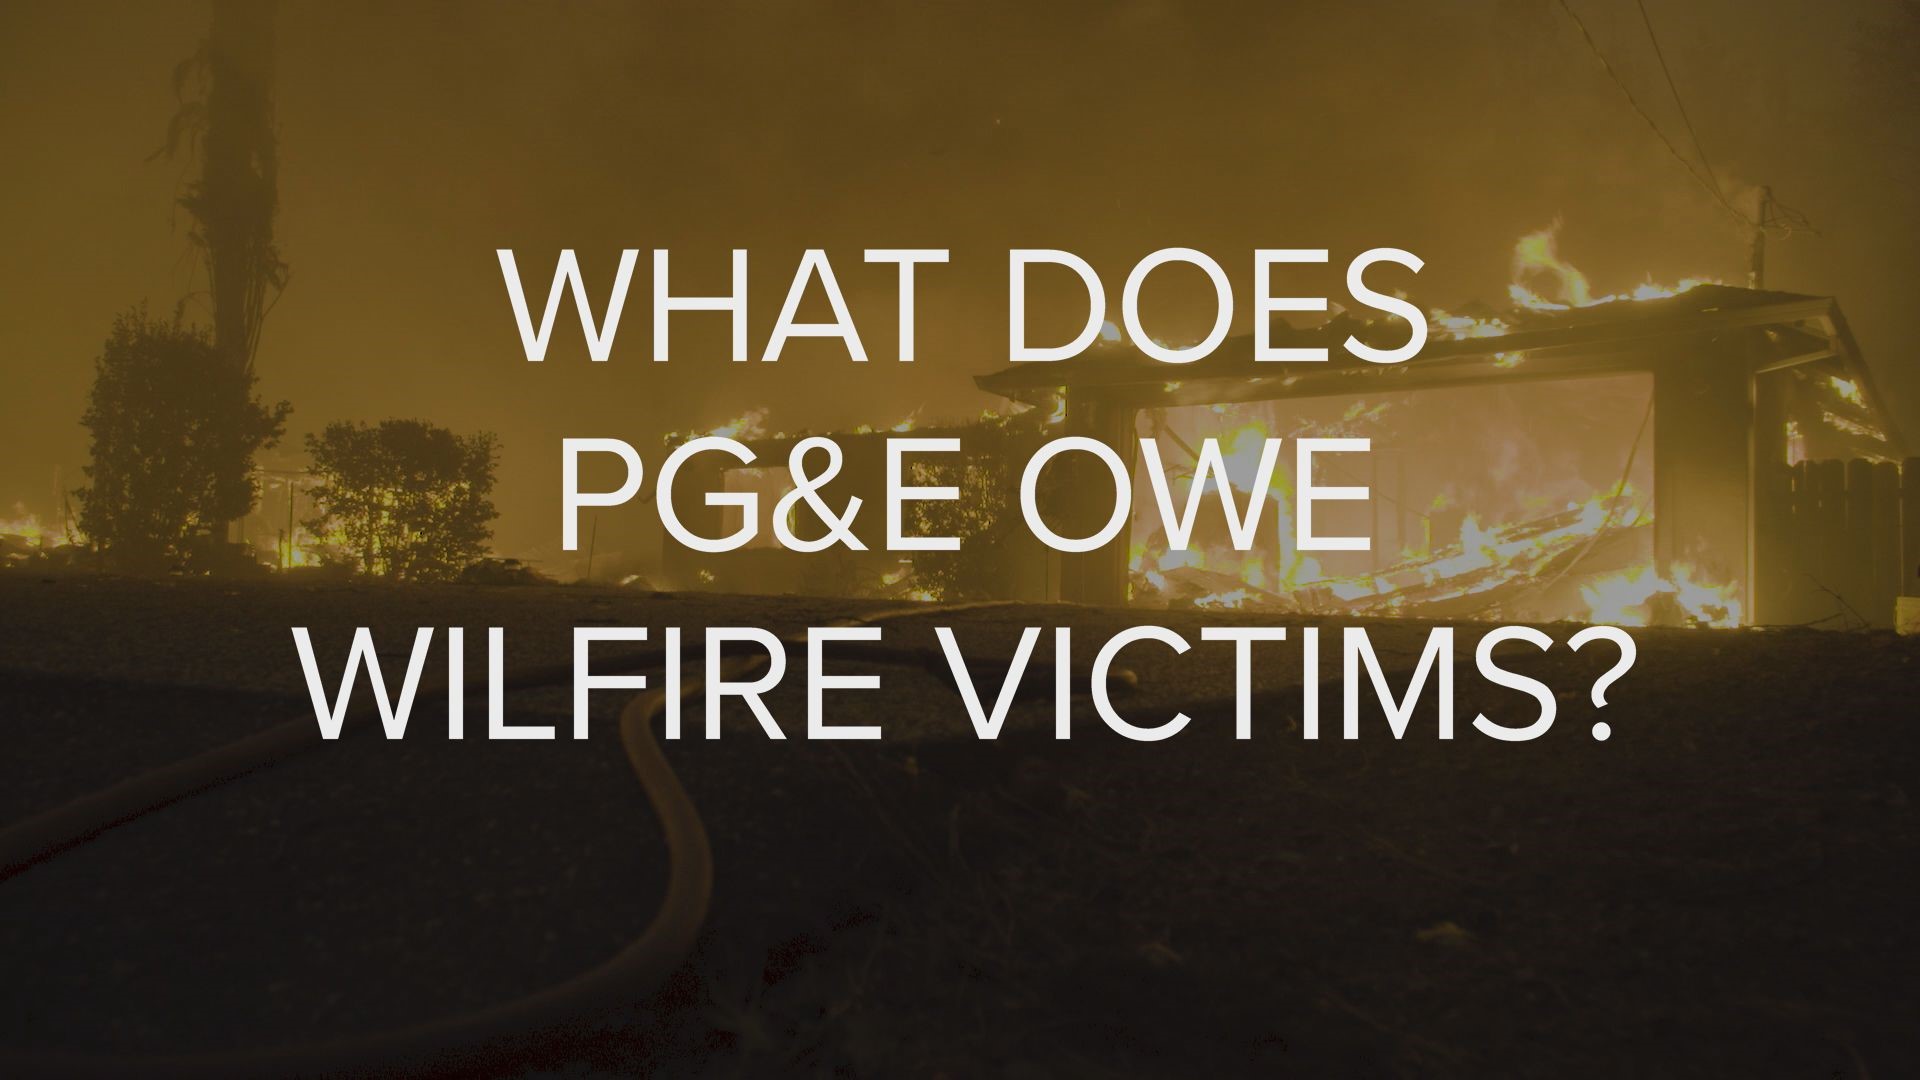 PG&E was back in court Tuesday, trying to figure out just how much money it may owe victims of recent wildfires caused by the utility’s equipment.